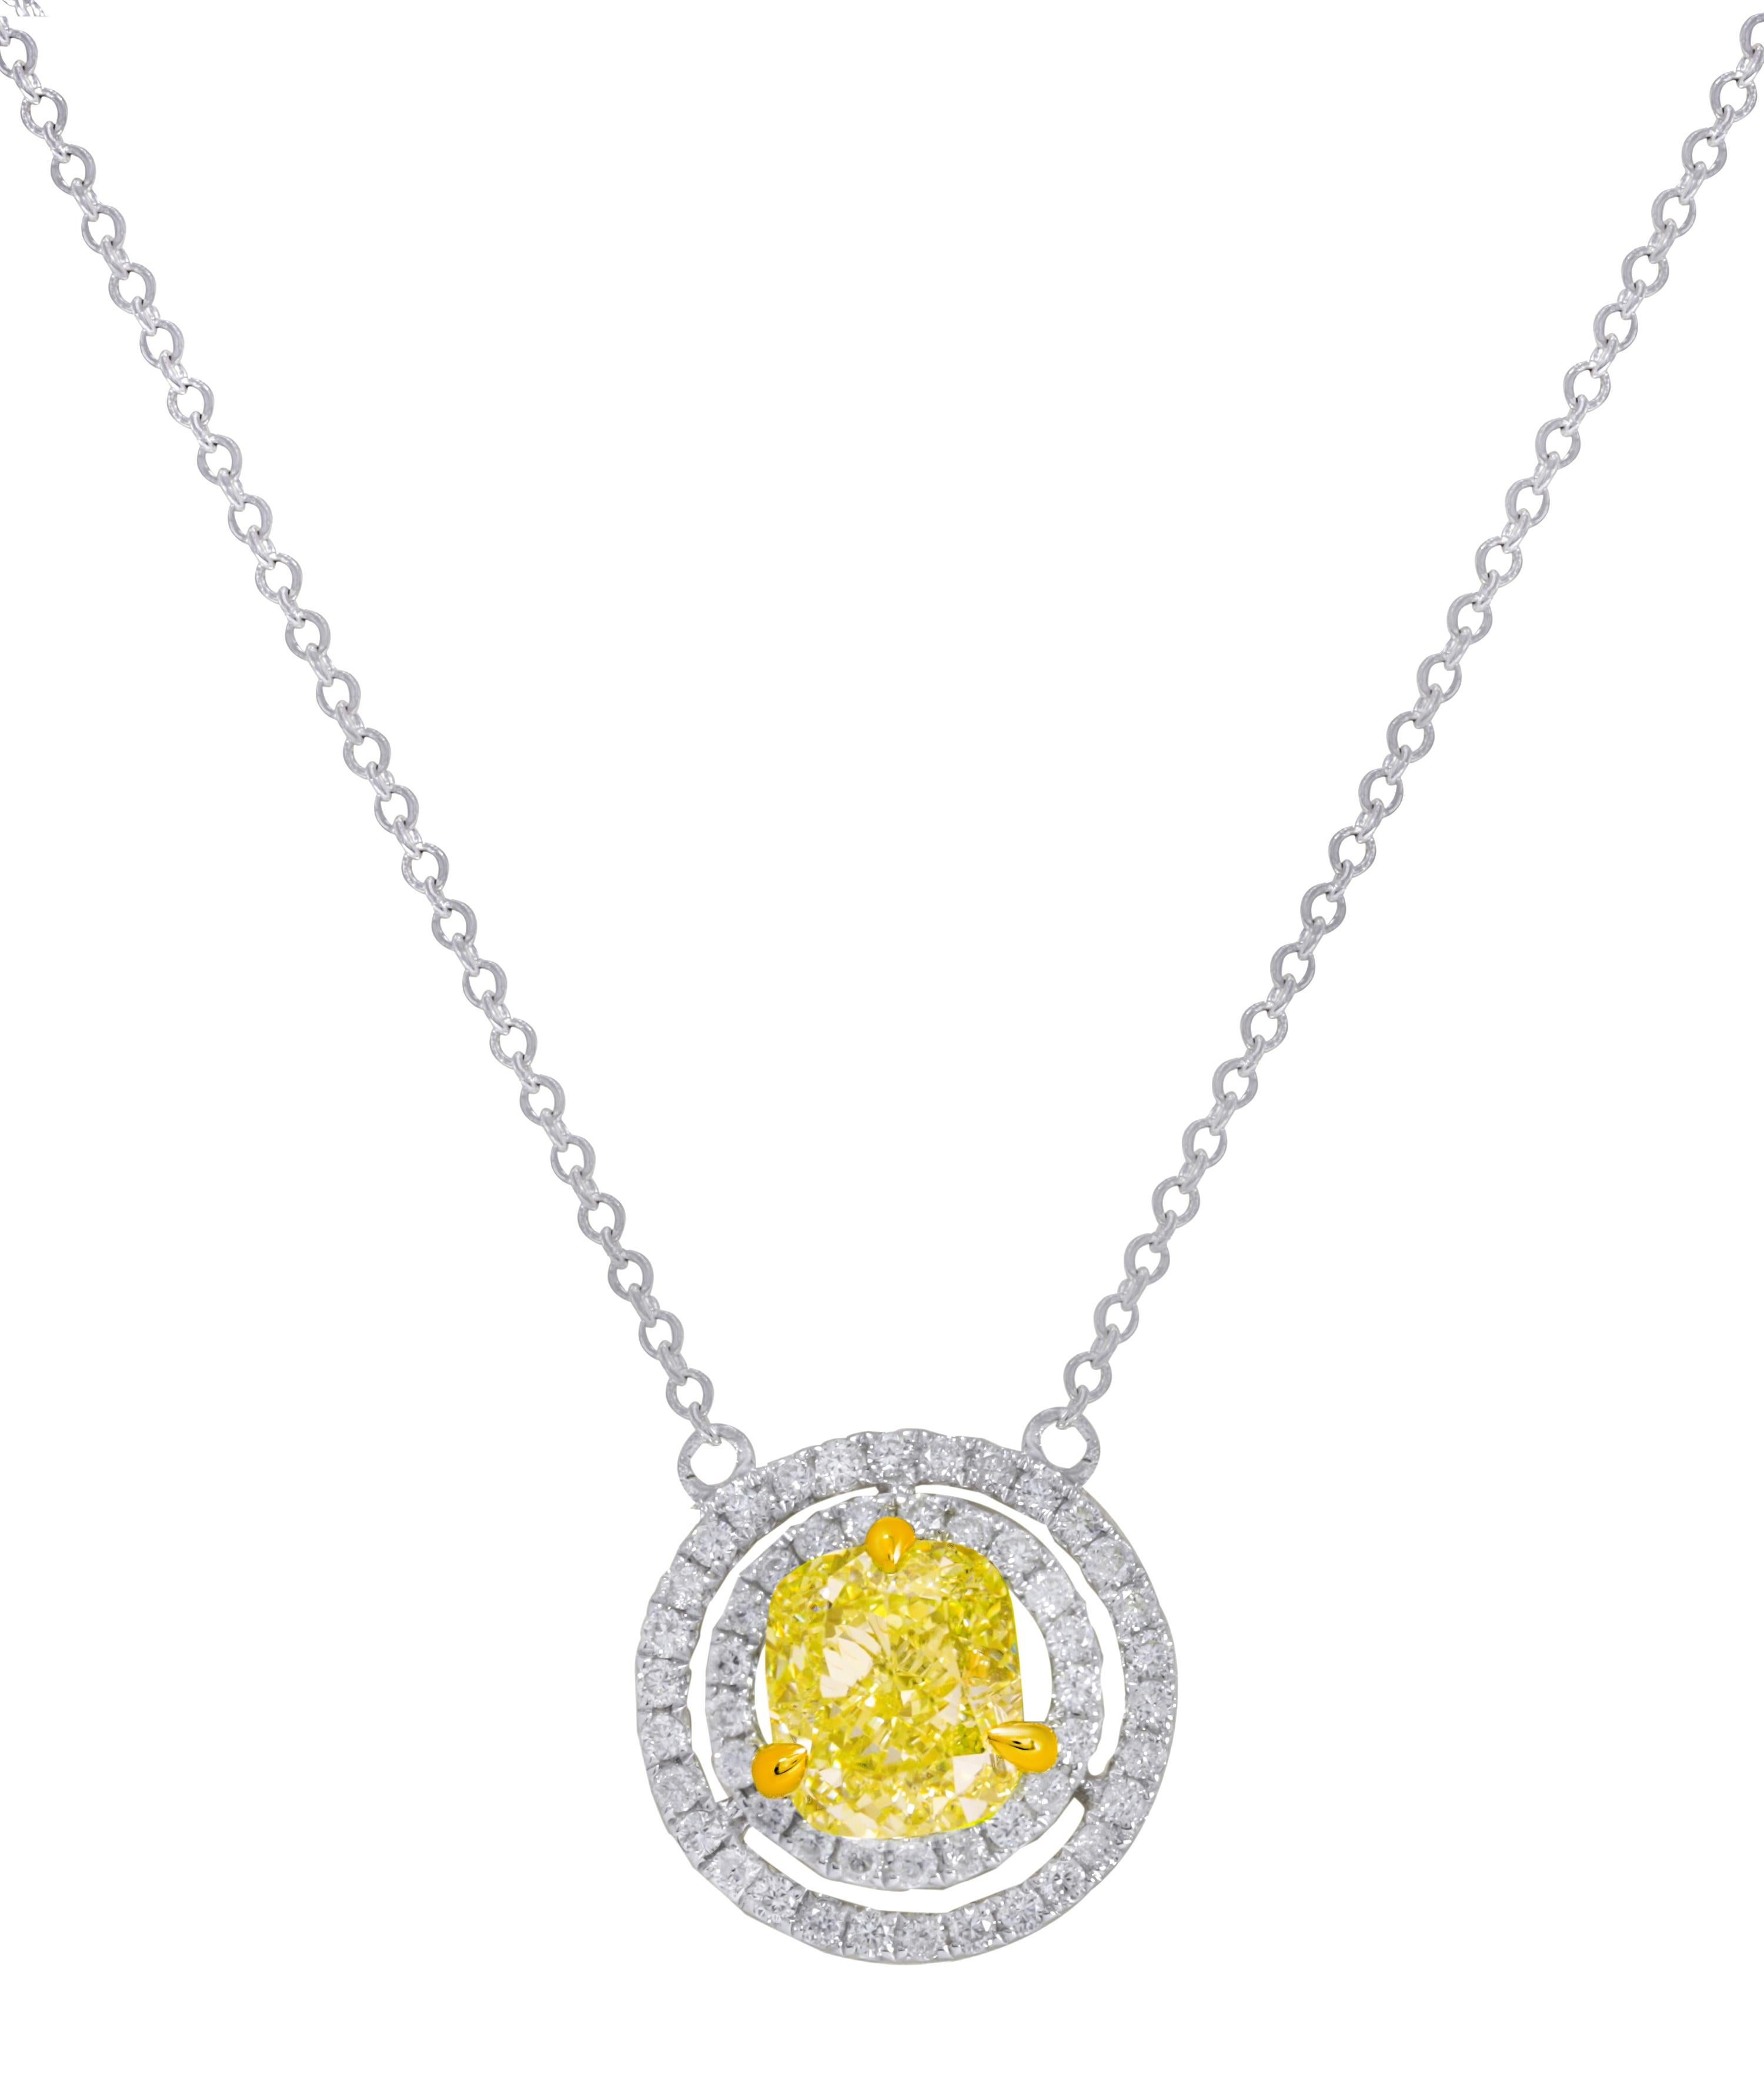 18KT DIAMOND PENDENT 1.39ct FLY VS2 PENDANT
Diana M. is a leading supplier of top-quality fine jewelry for over 35 years.
Diana M is one-stop shop for all your jewelry shopping, carrying line of diamond rings, earrings, bracelets, necklaces, and